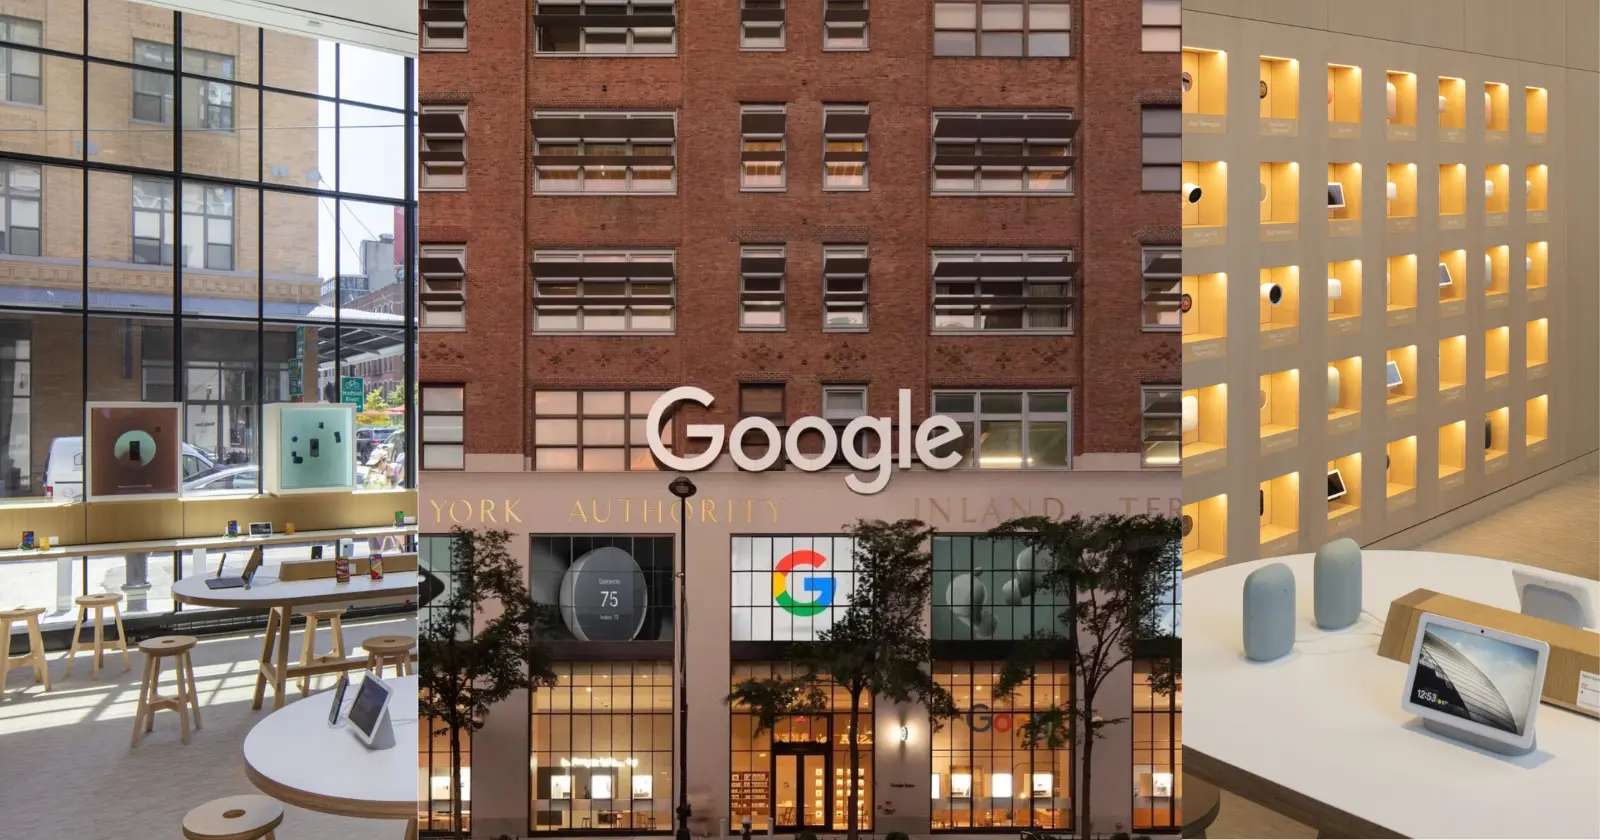 After Chelsea, Williamsburg and Mountain View, the fourth Google store to open in Boston on Friday